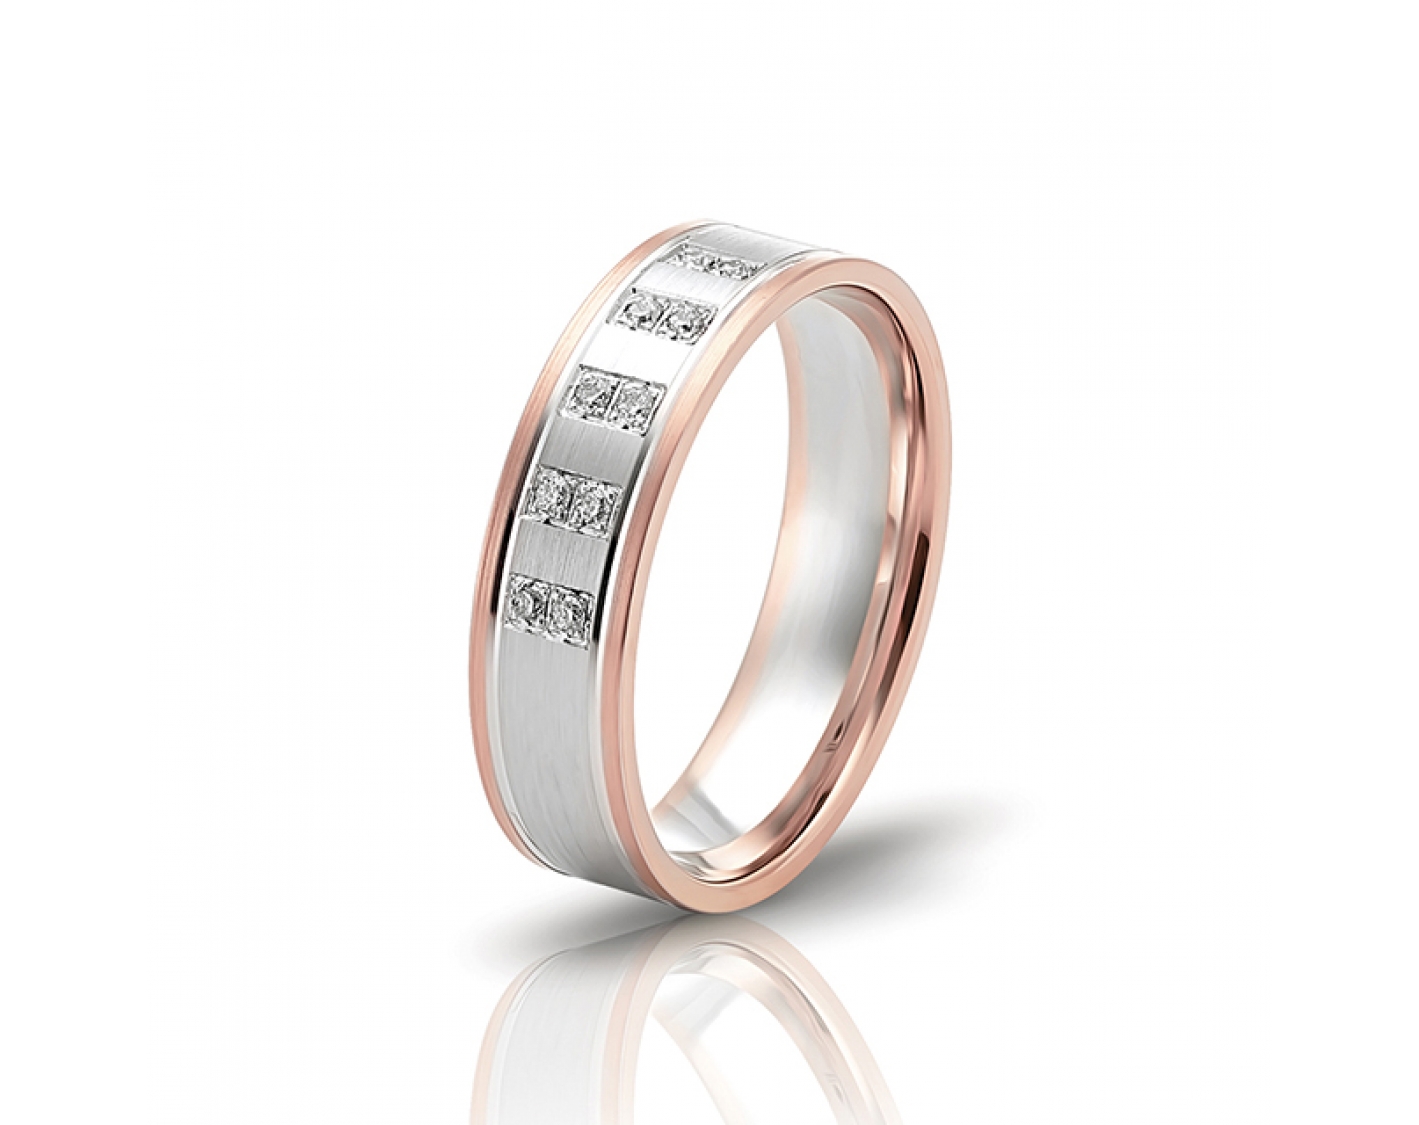 18k rose gold 6mm two-toned* matte wedding band with diamond lines and colored edges